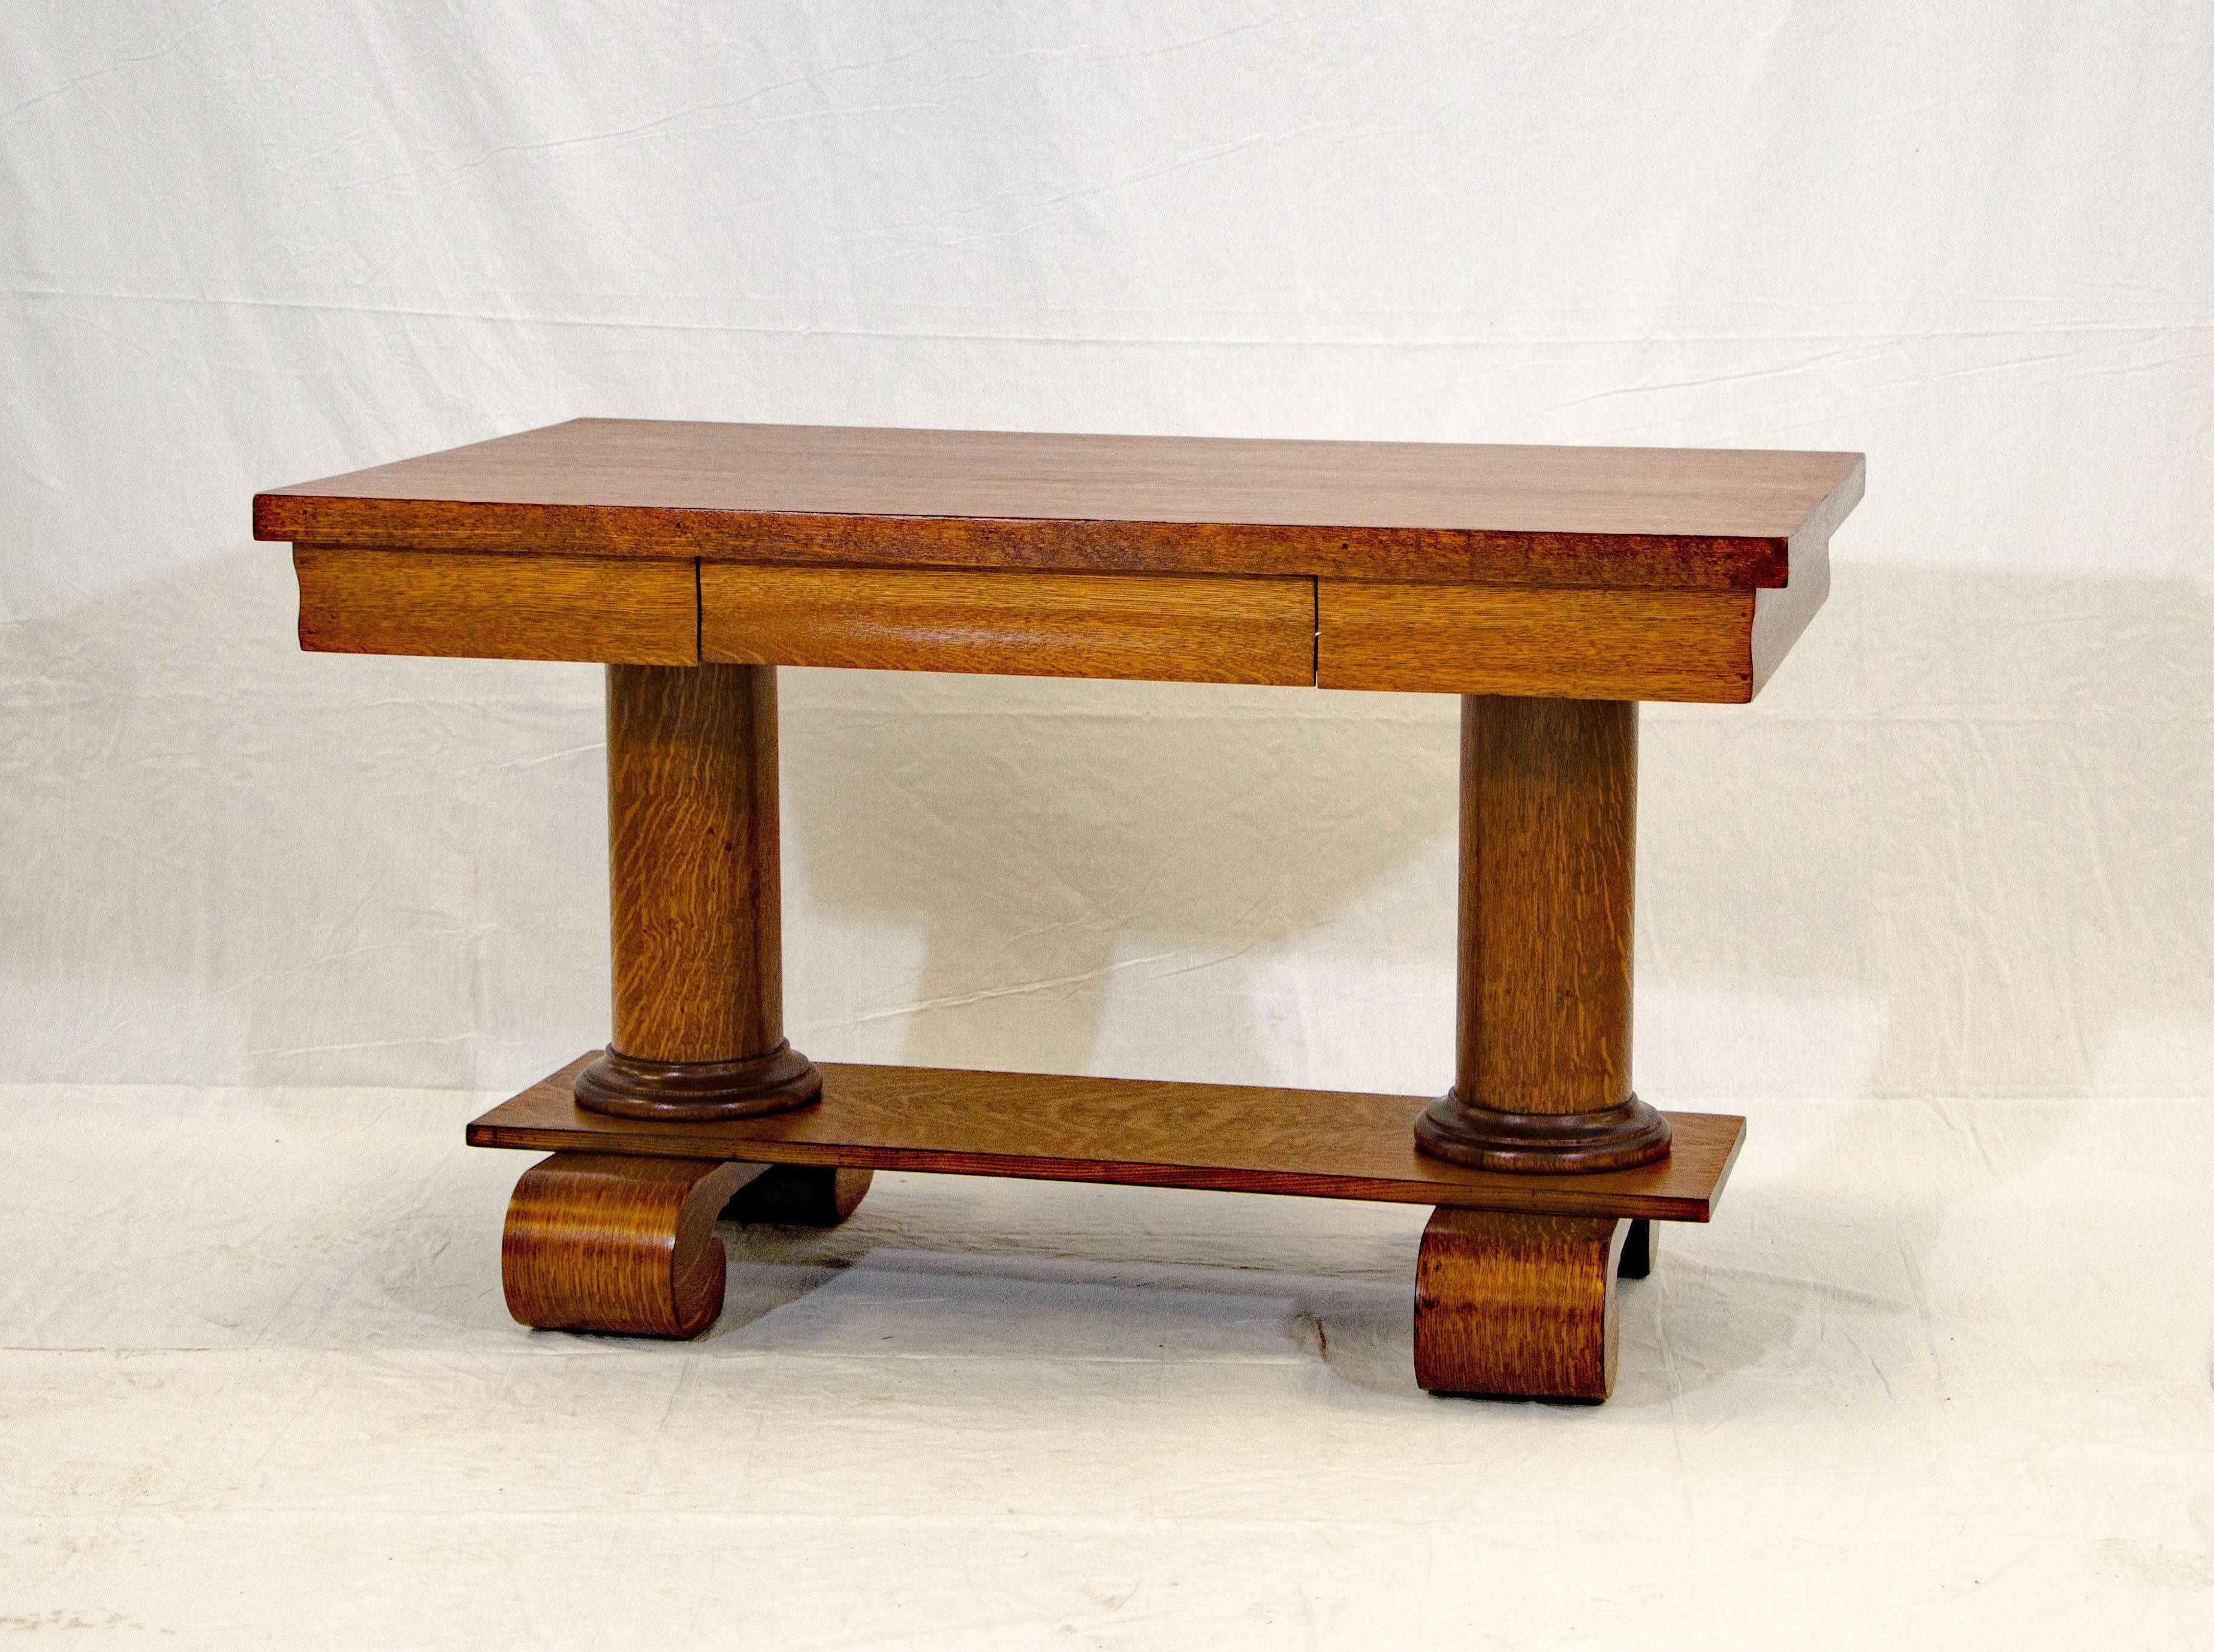 Vintage turn of the century Art & Crafts quarter sawn oak library table with round pedestals between the top writing surface and the base. The one storage drawer pulls out in the center of the top with an interior height of 2 1/2